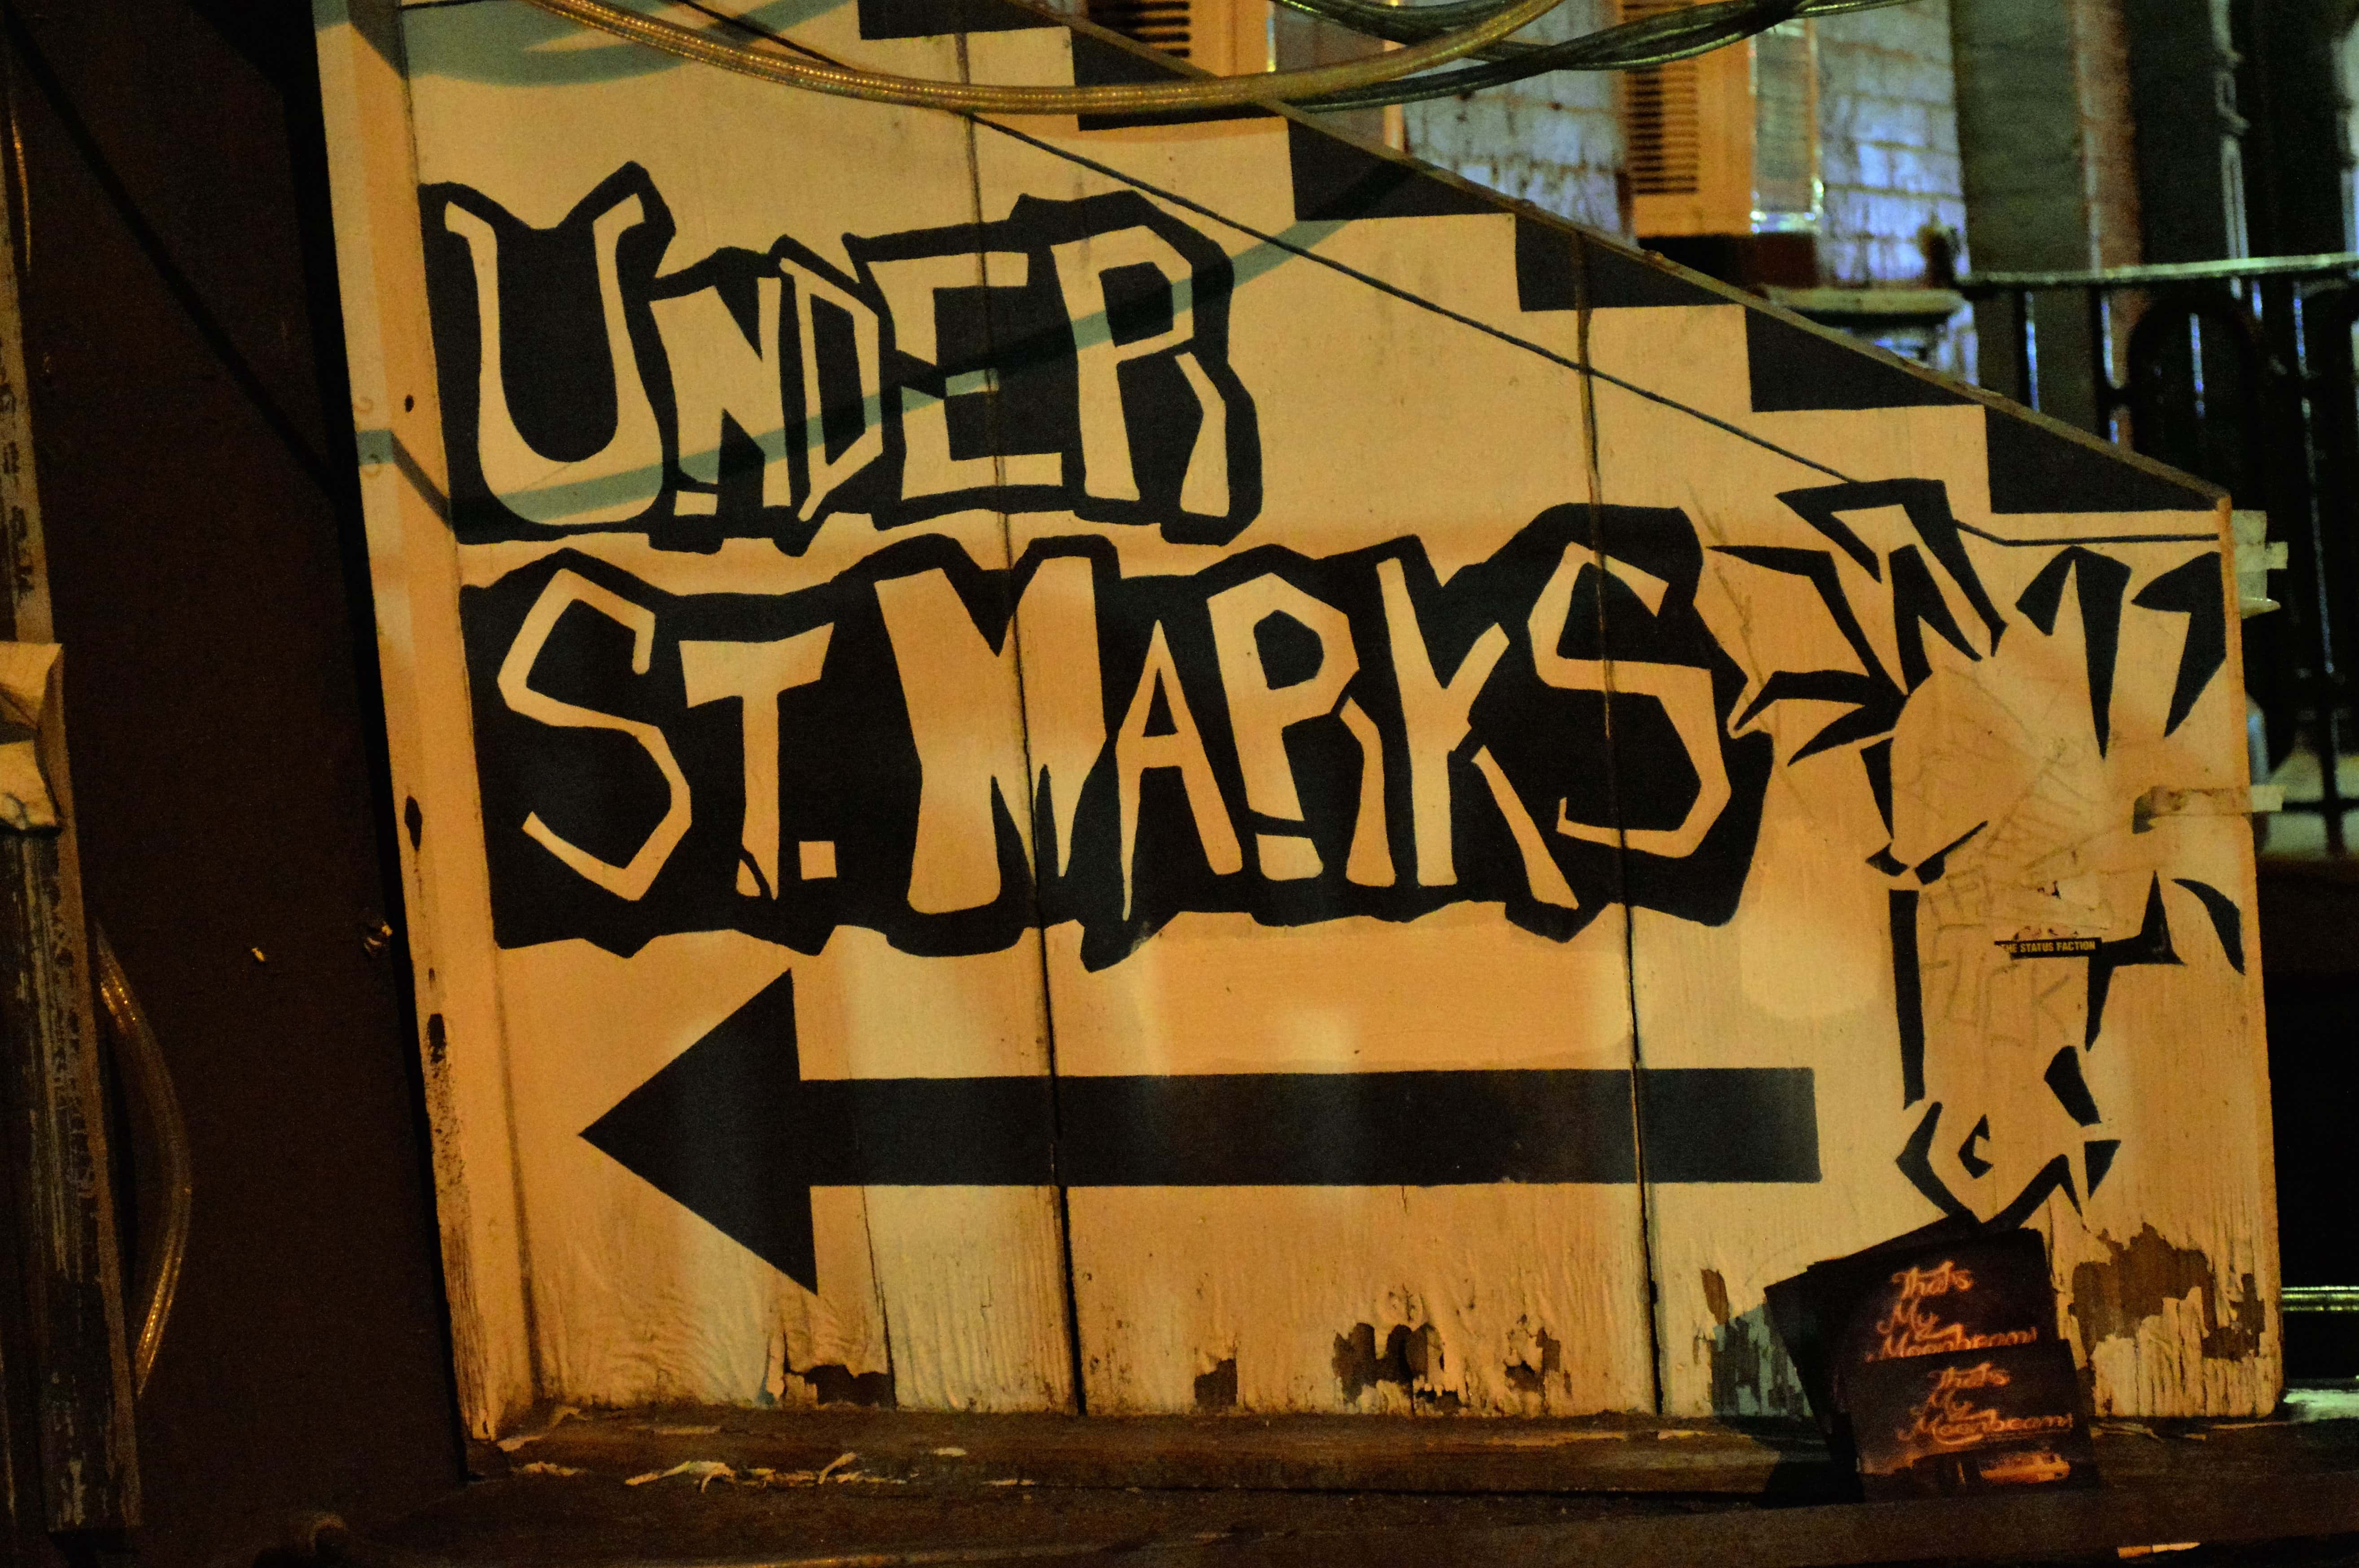 St. Marks Place is a popular strip for bars and clubs in the East Village Photo taken by Meghan Riley